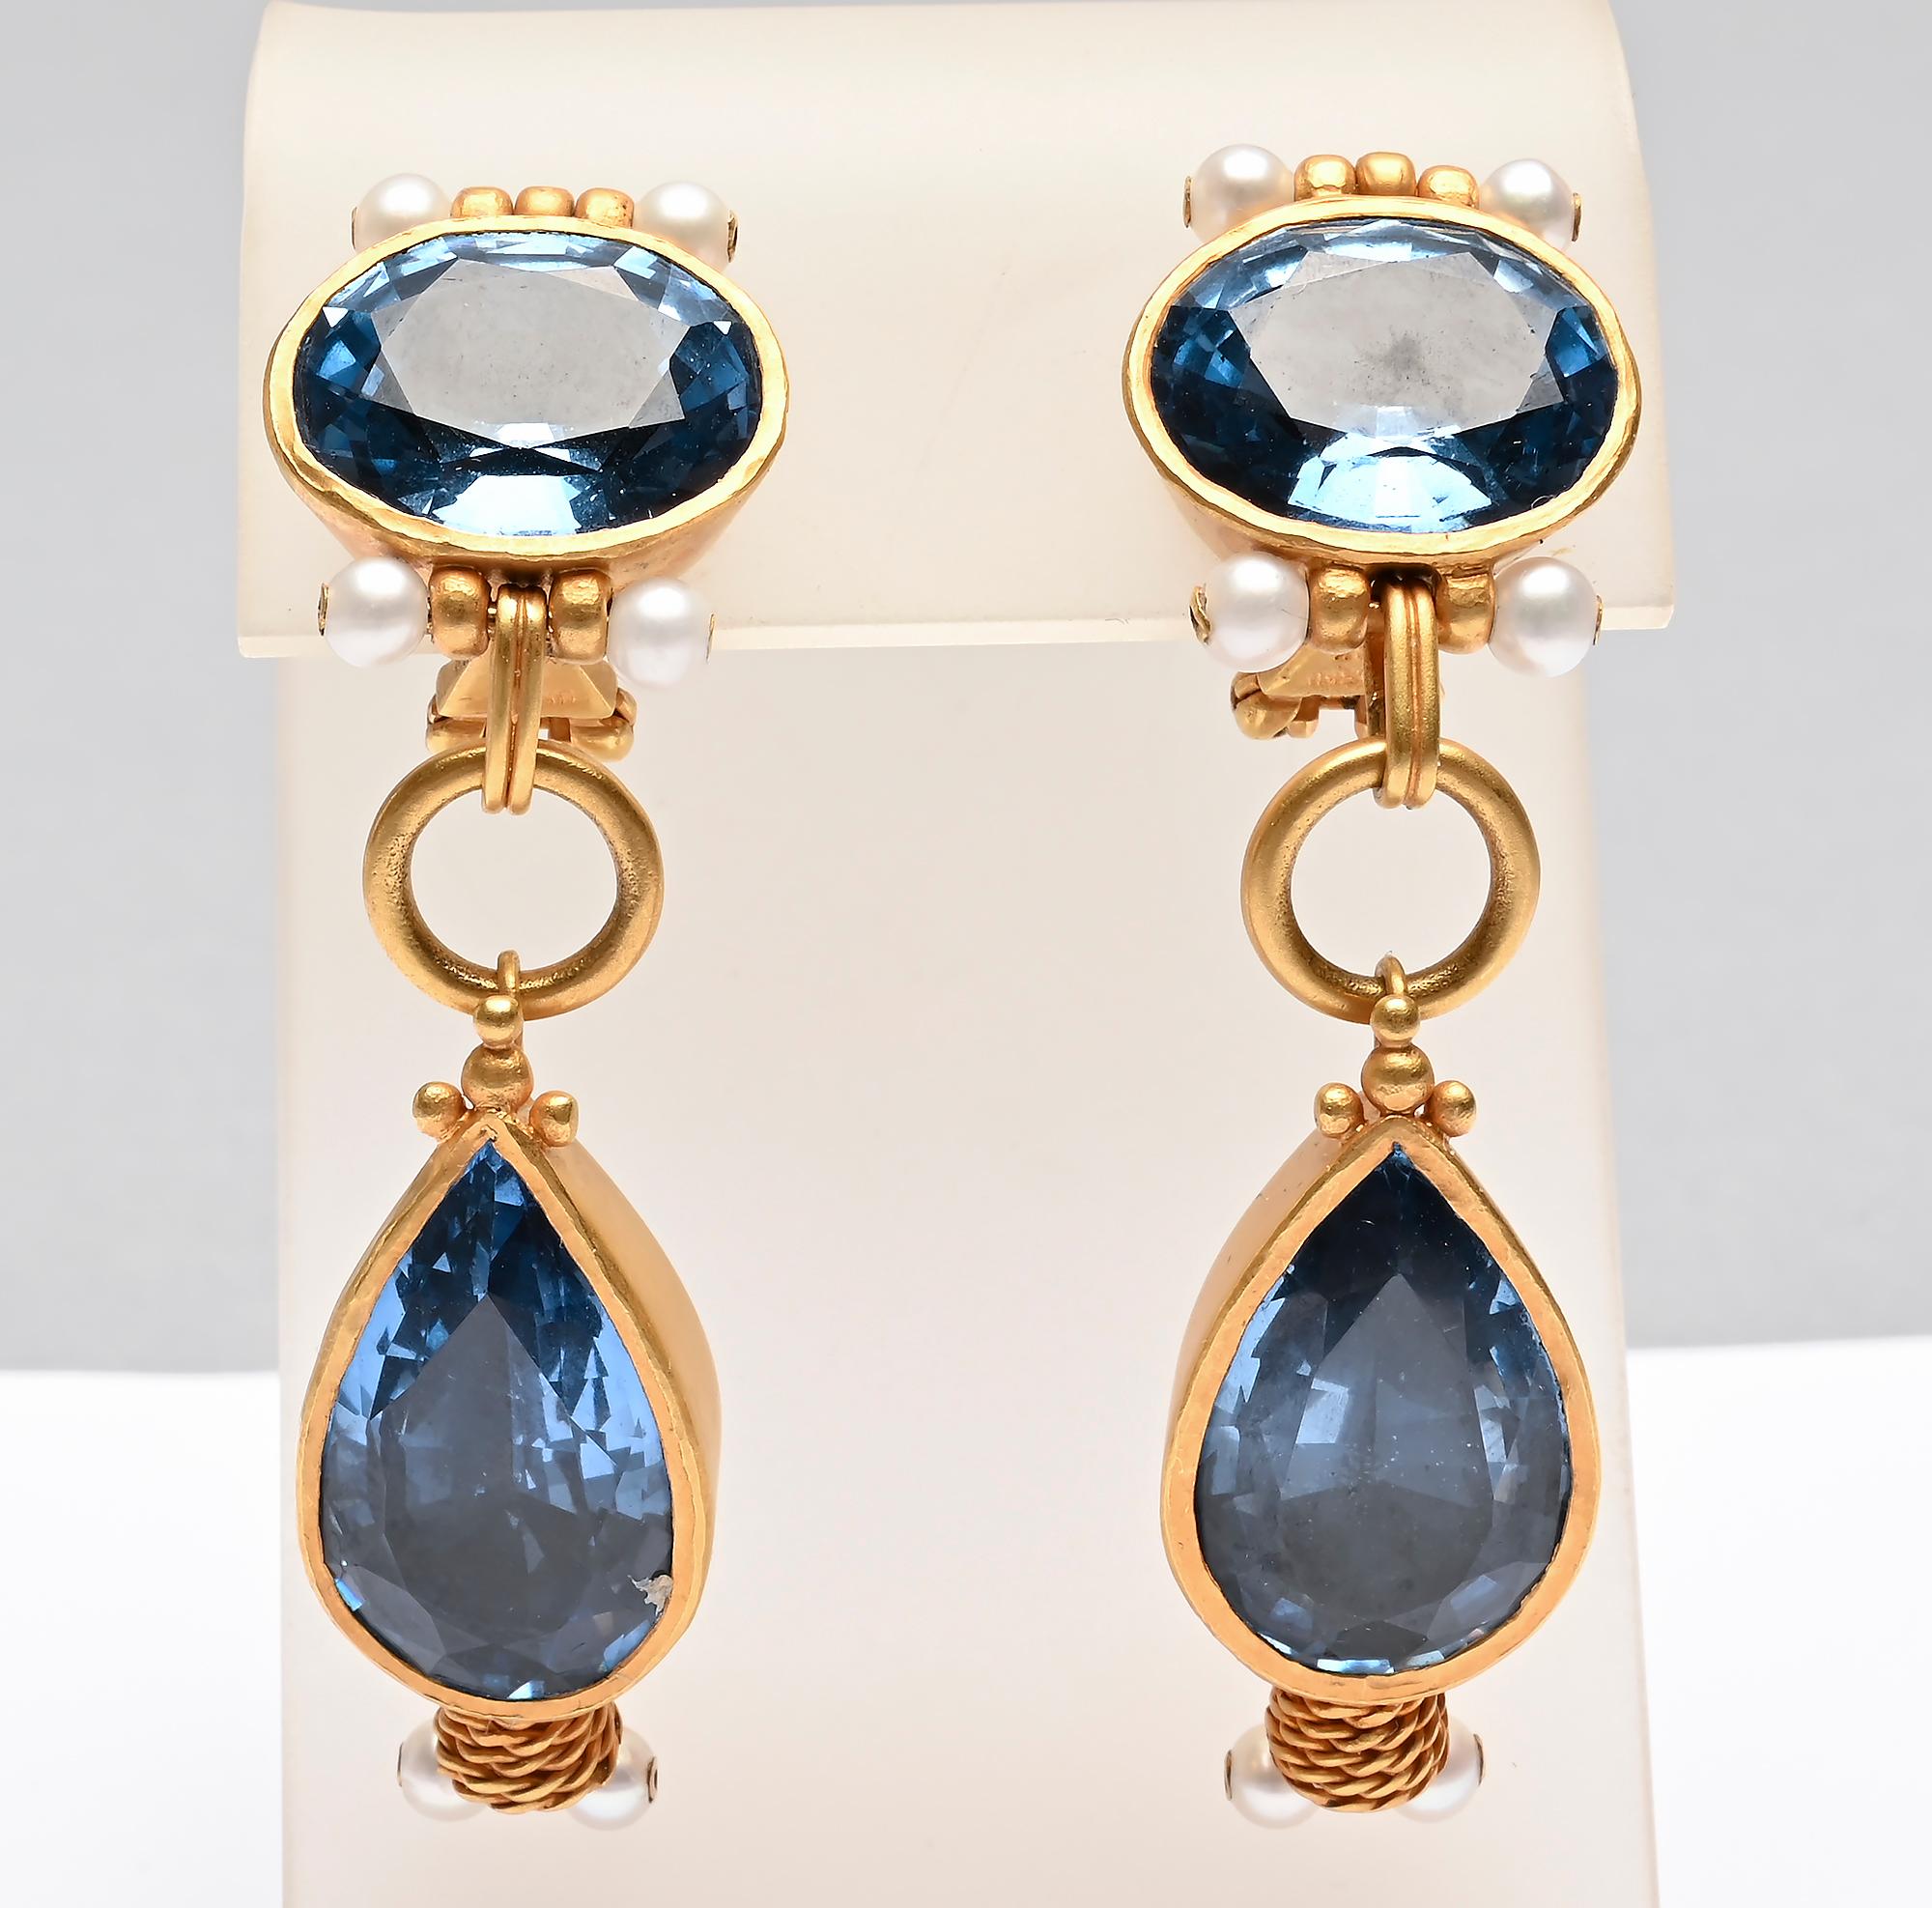 Most unusual and elegant 18 karat gold earrings with two large blue topaz stones. The top is oval, measuring 5/8